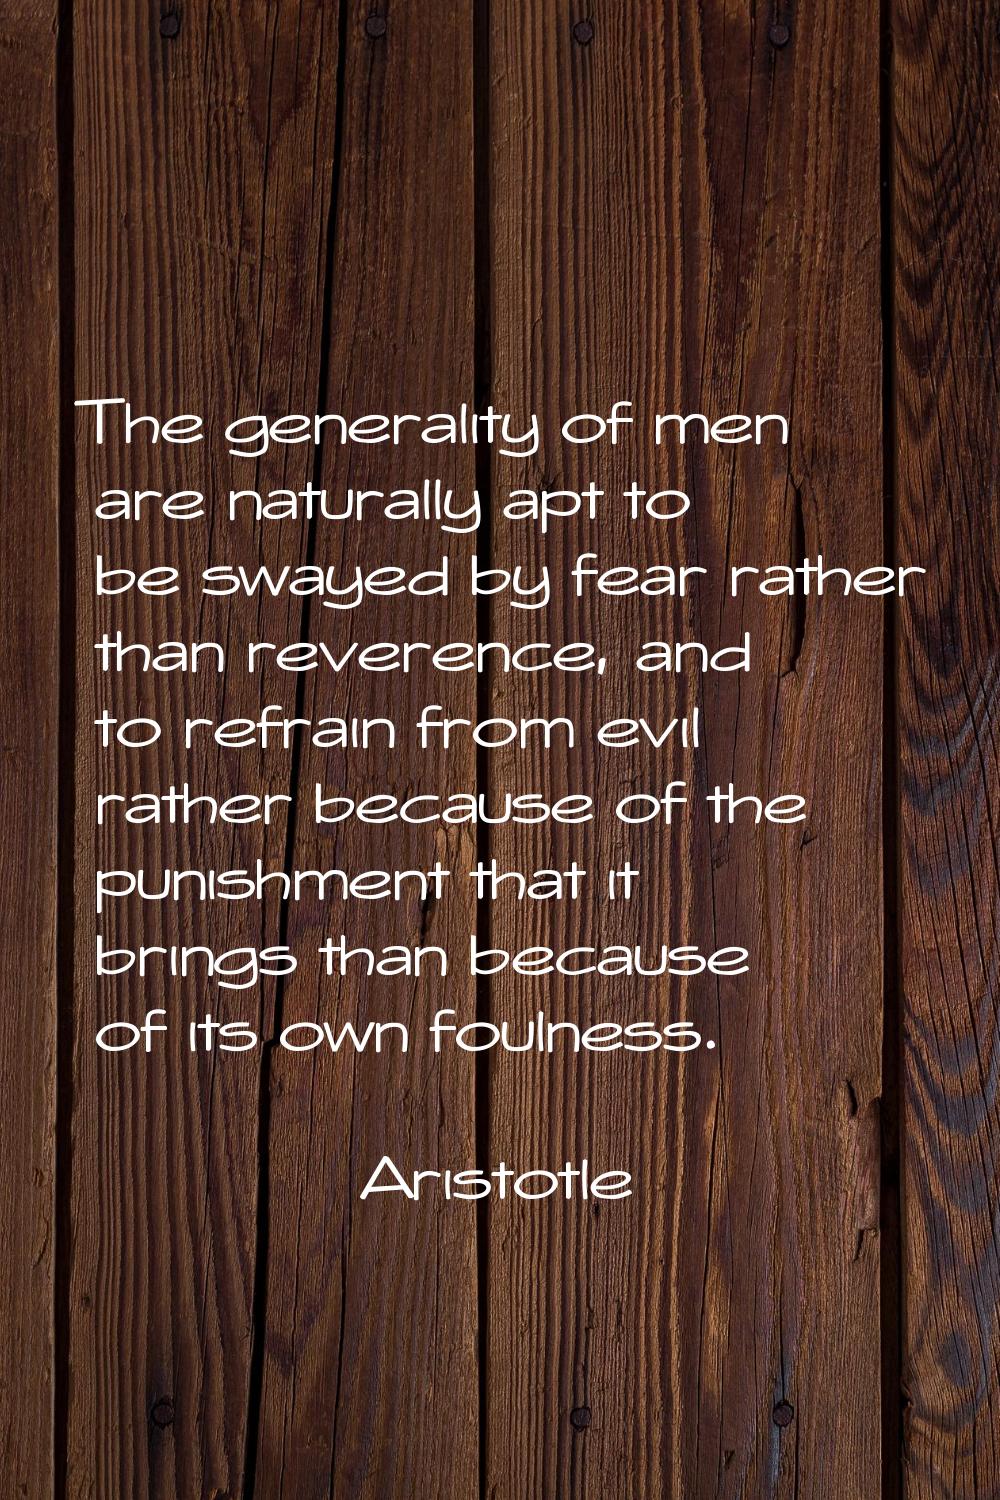 The generality of men are naturally apt to be swayed by fear rather than reverence, and to refrain 